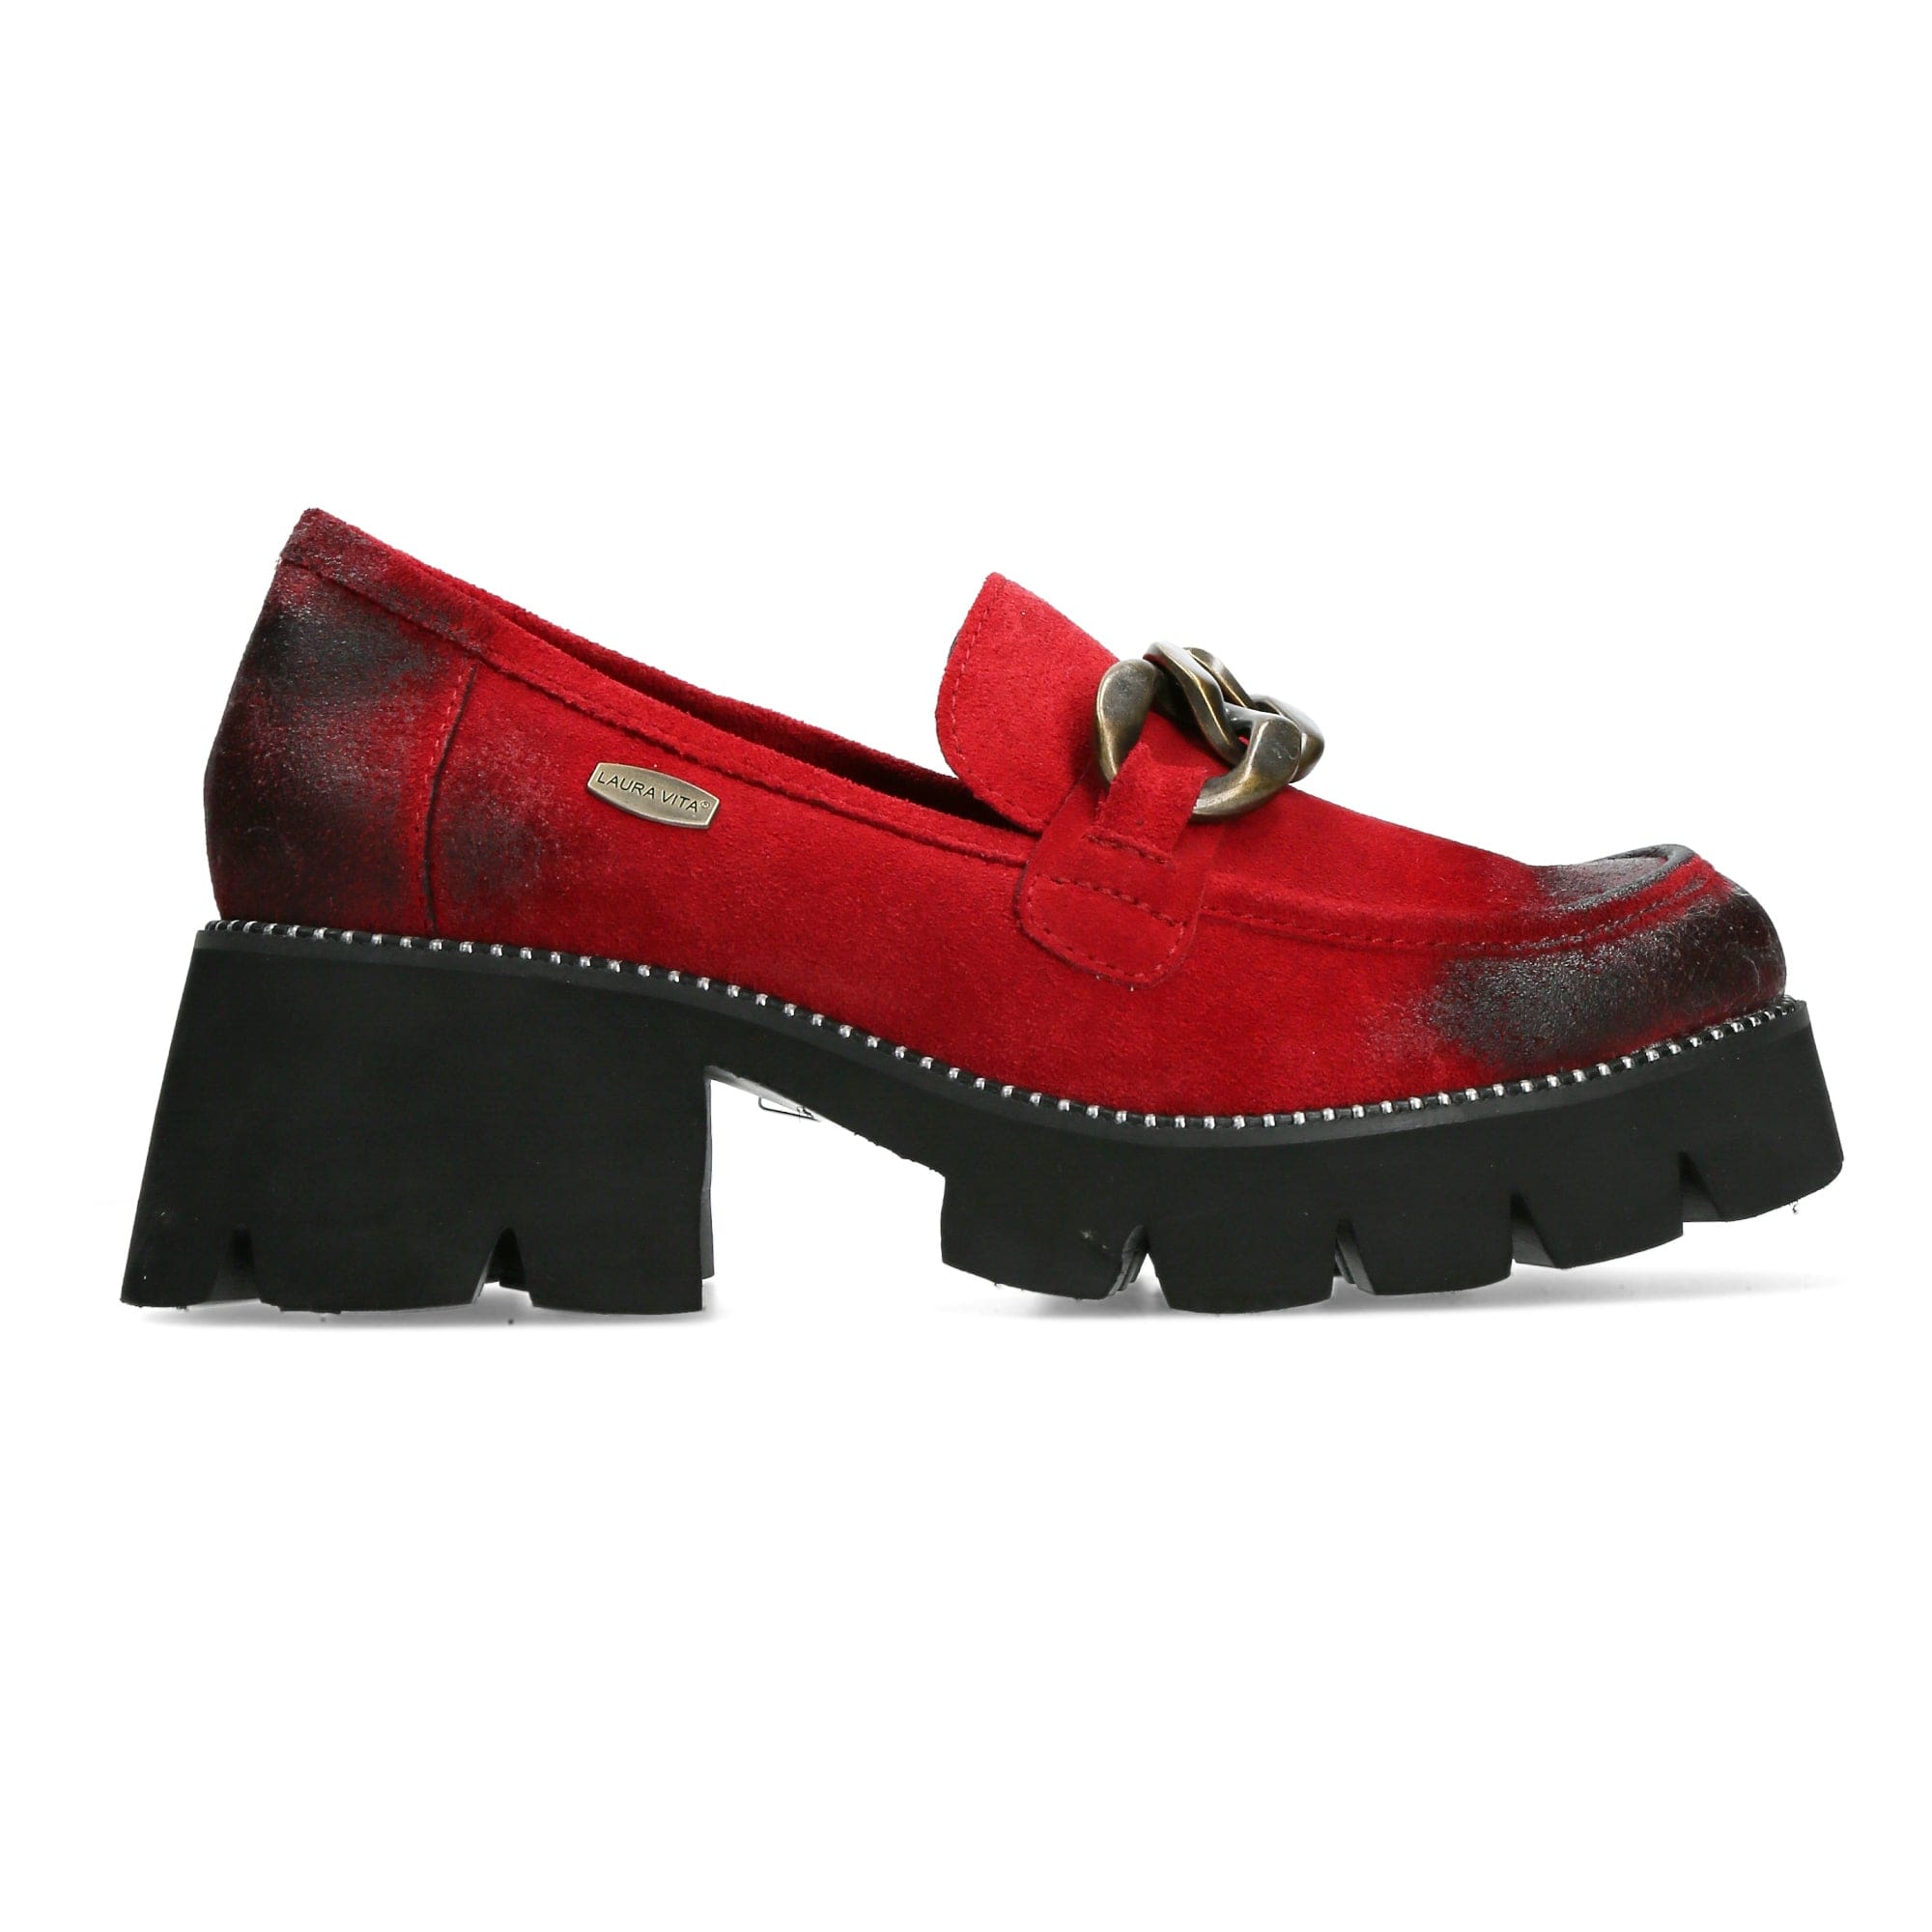 Shoe OMIO 07 - 35 / Red - Moccasin